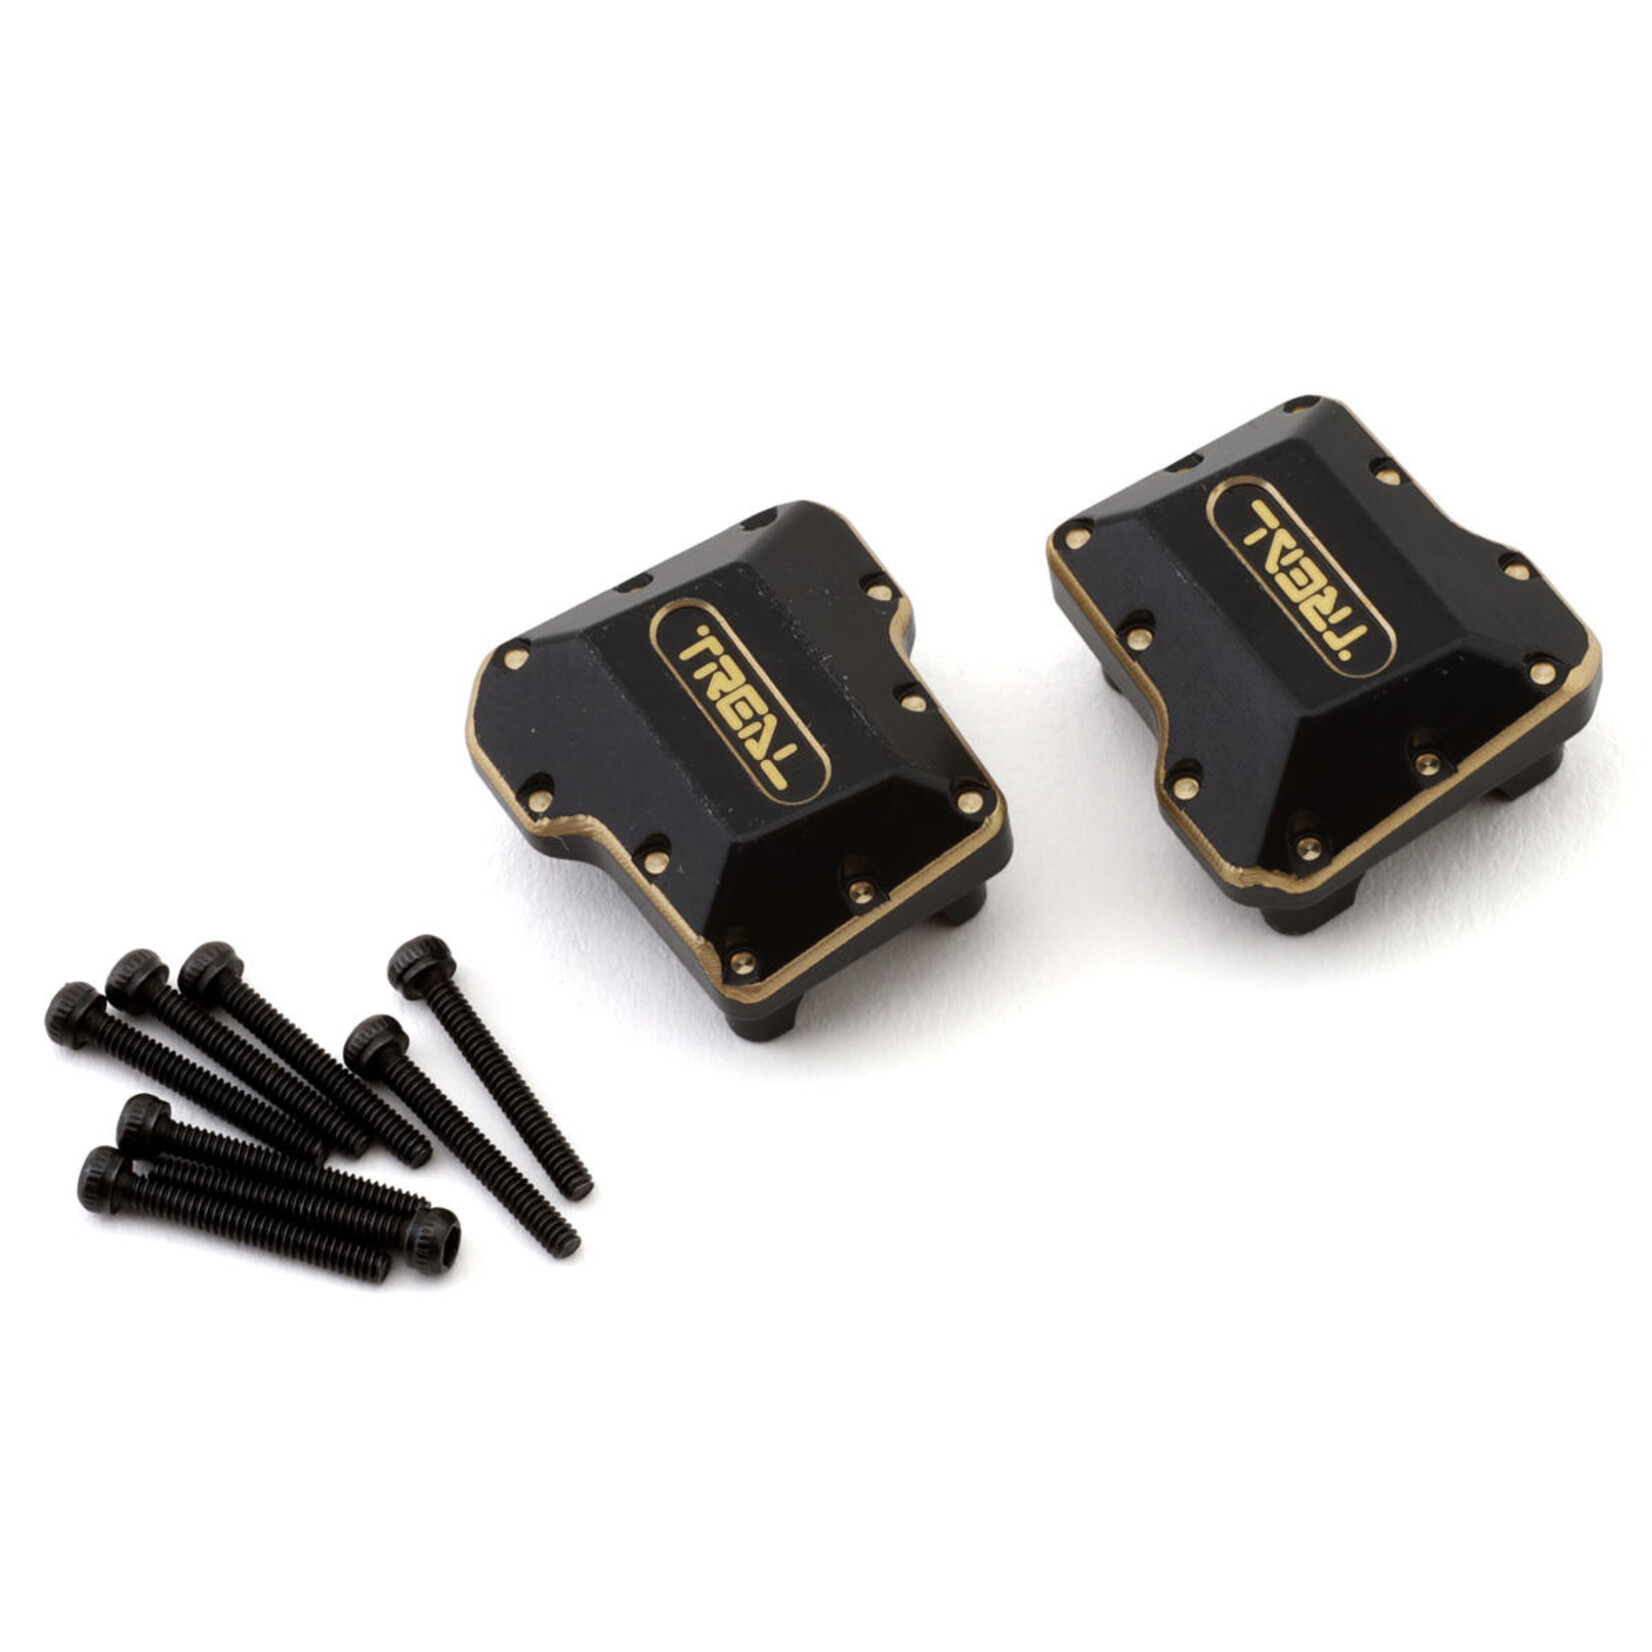 Treal Treal Hobby TRX-4M Brass Axle Differential Covers (Black) (2) (15.8g) #X003K9N9FH